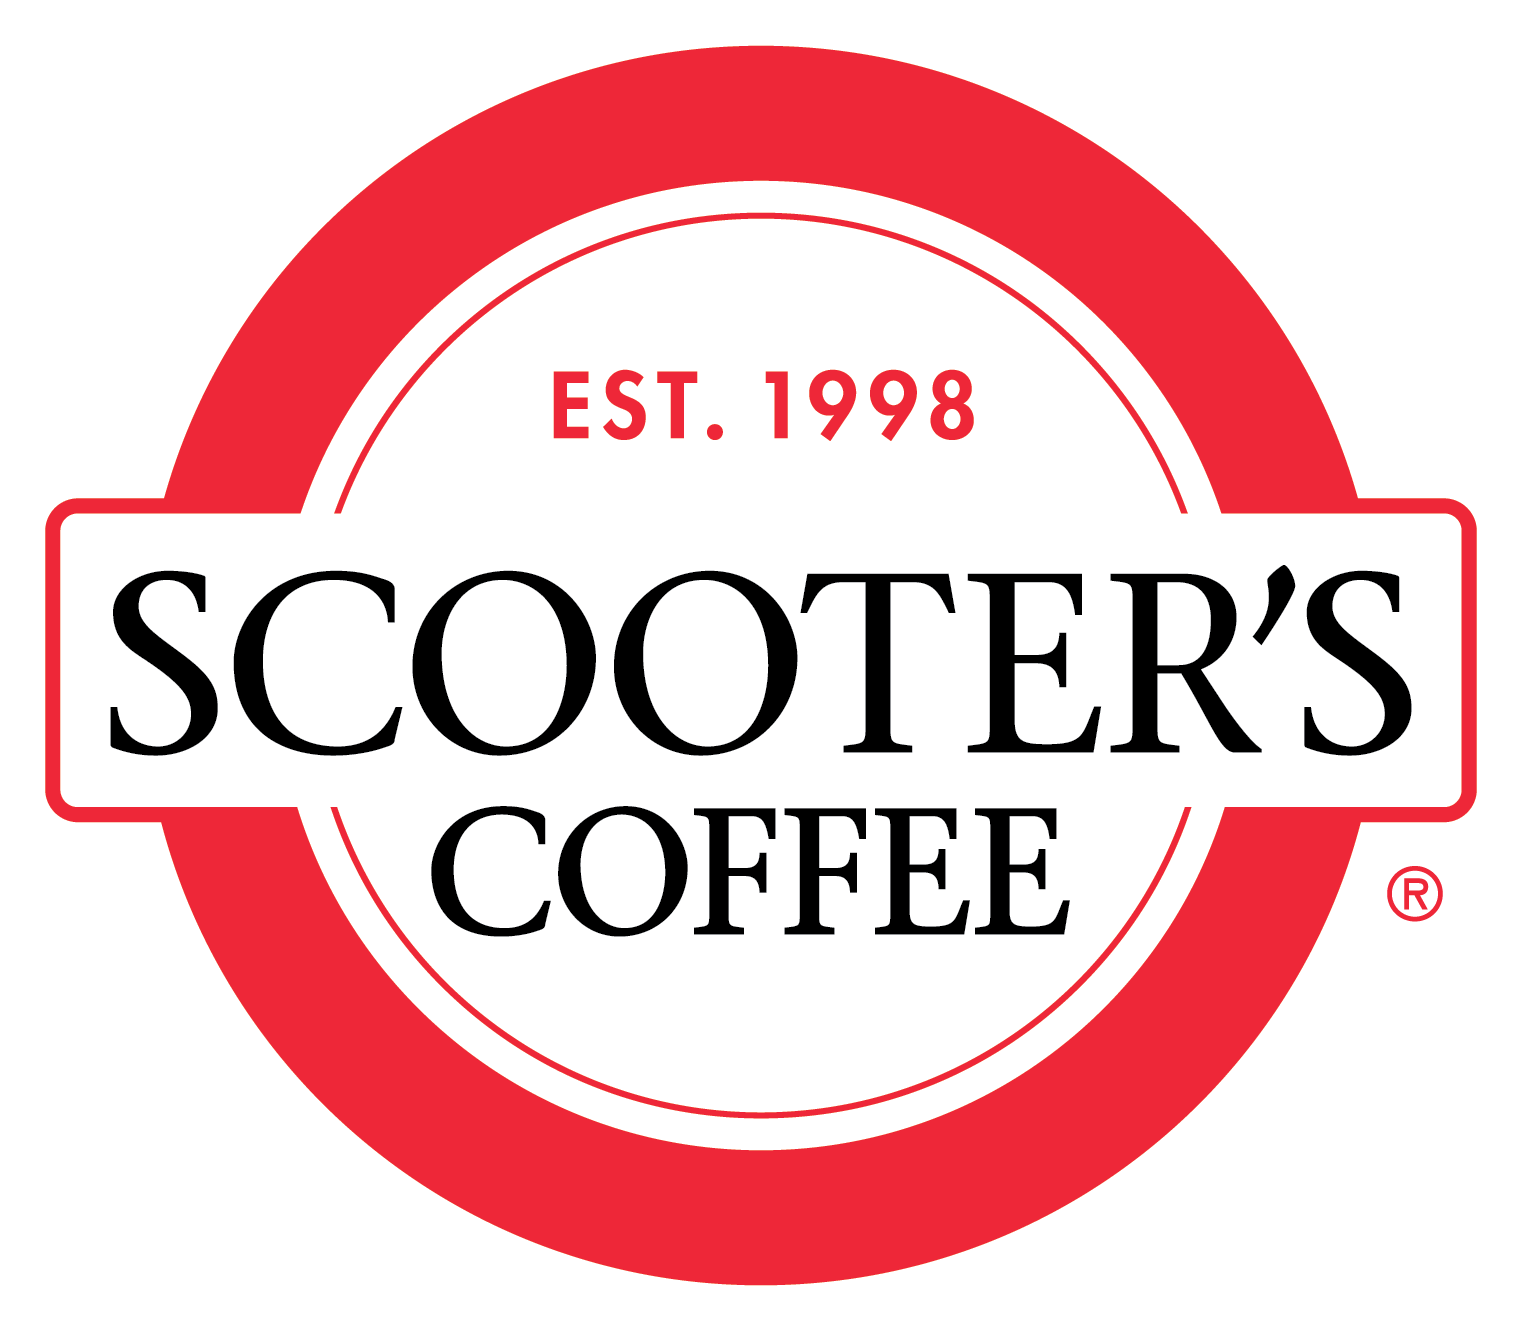 September is Scooter’s Coffee® Month!